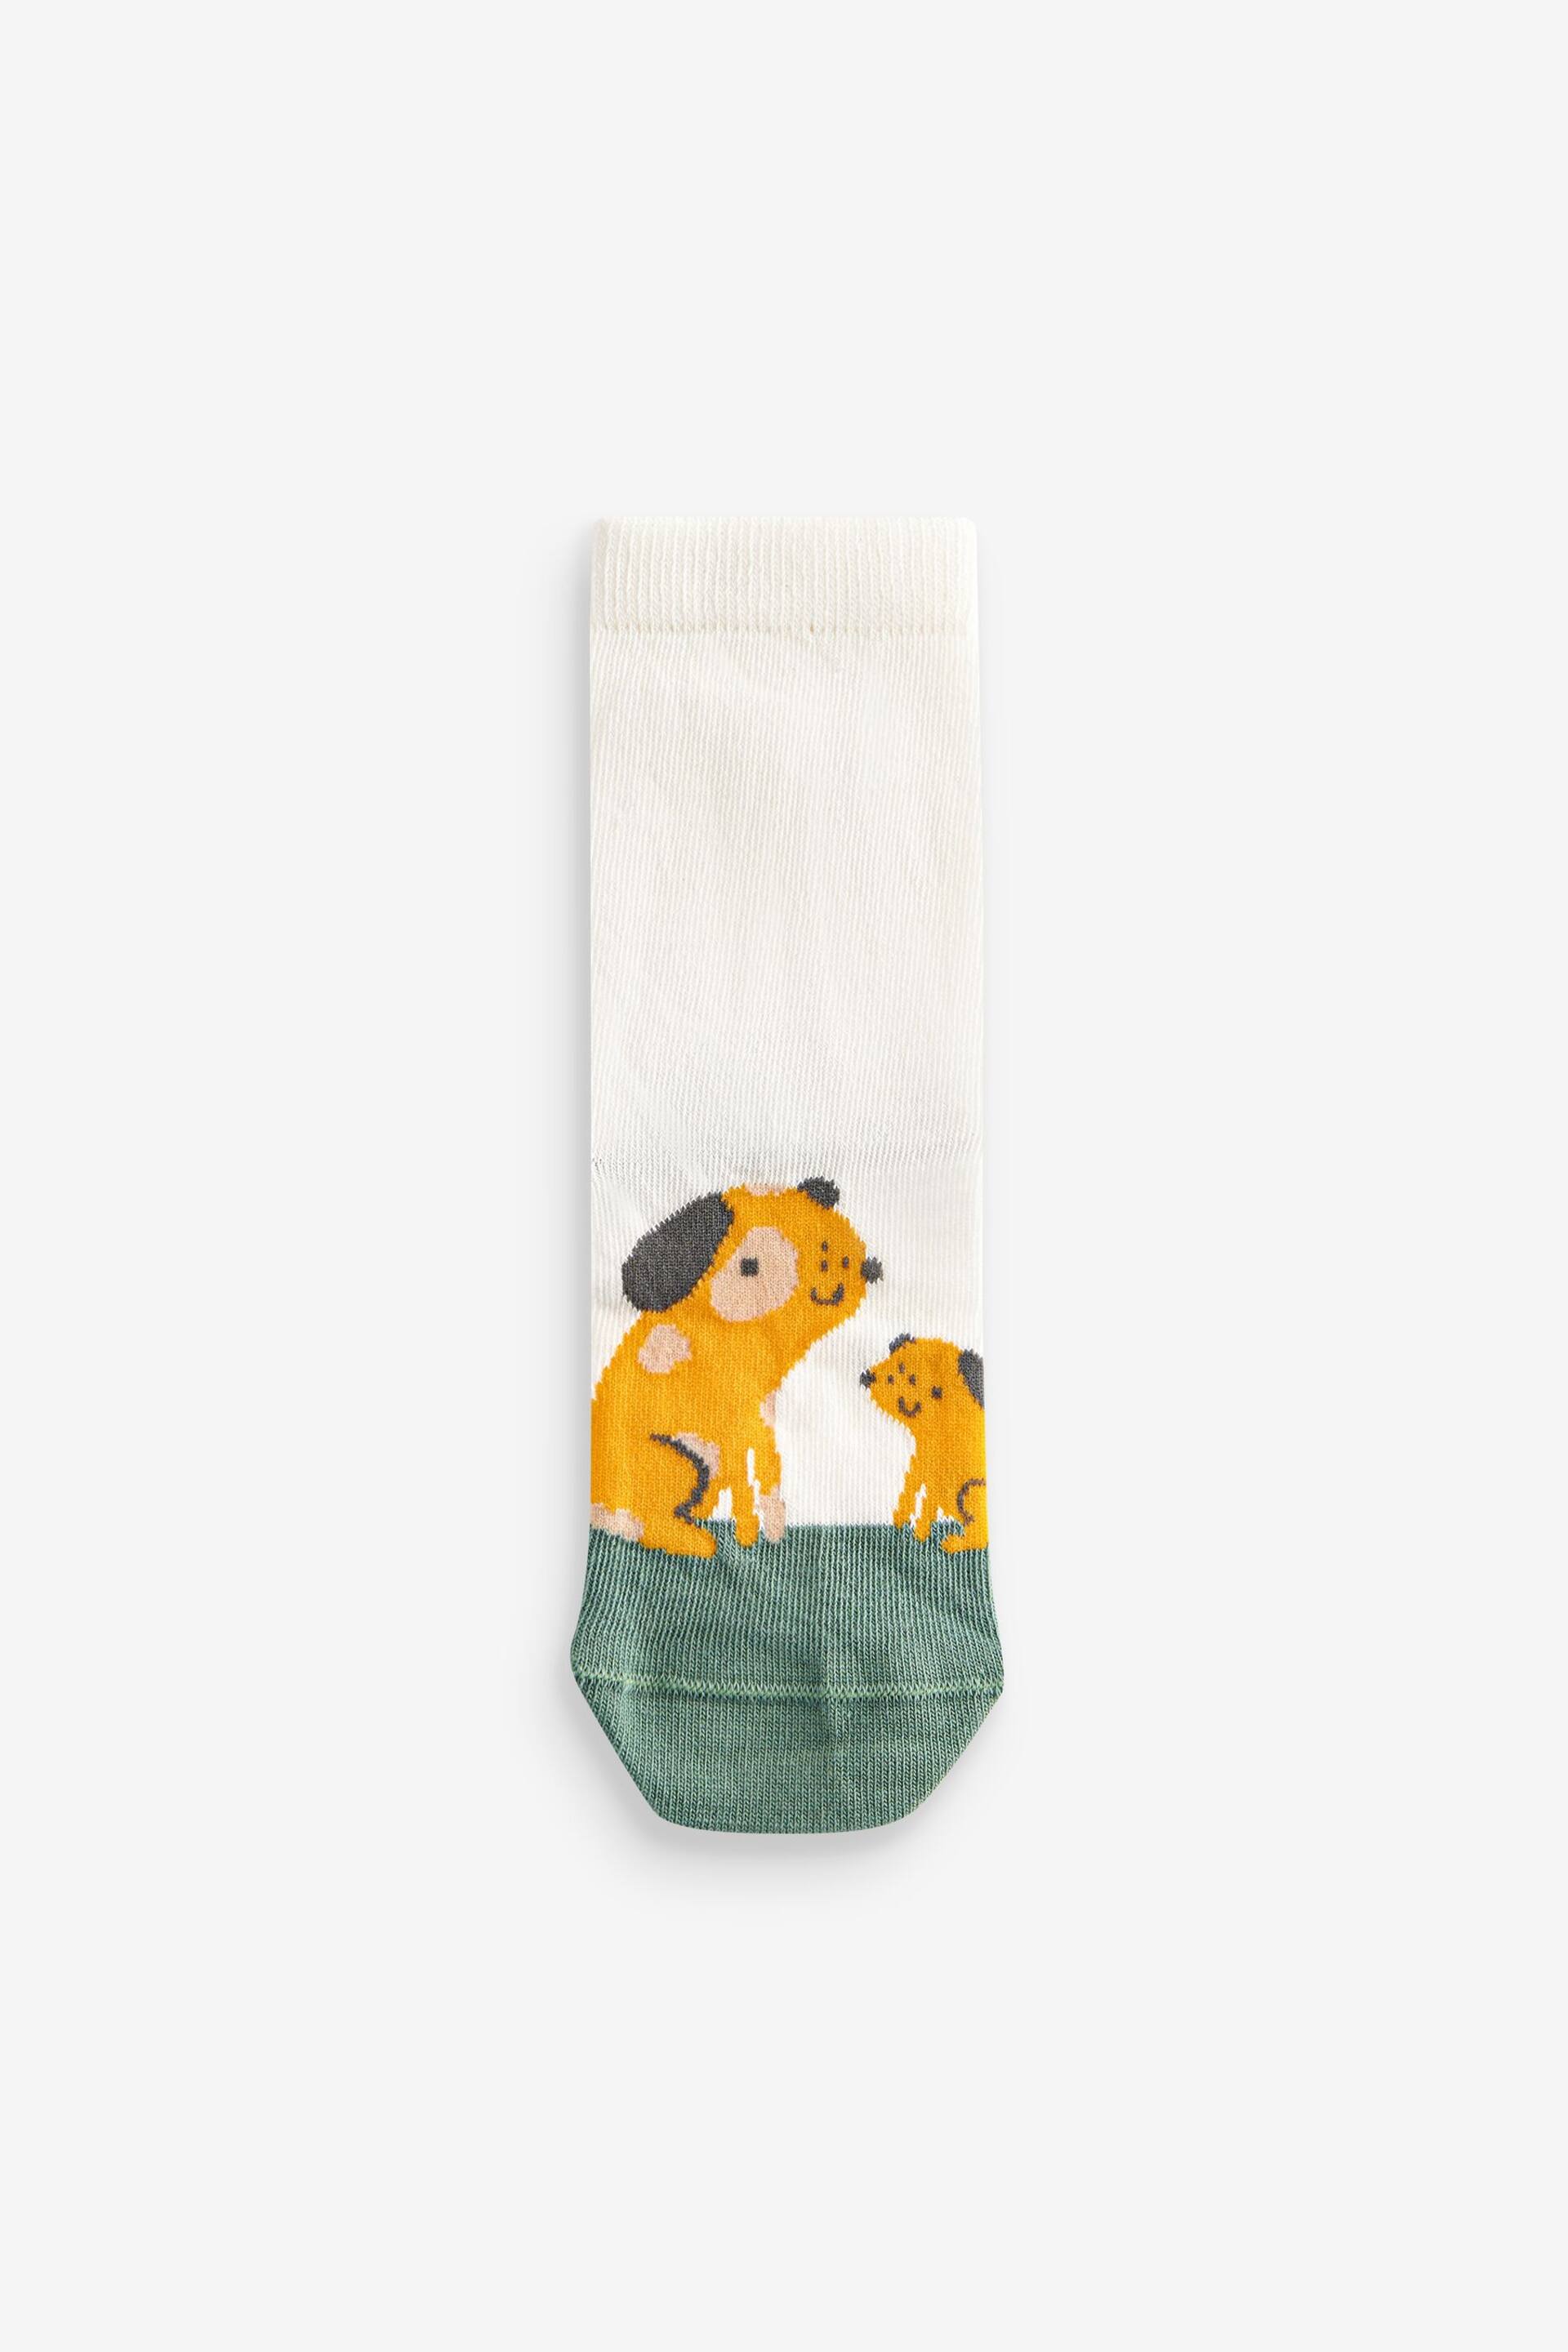 White Farm Animals Cotton Rich Trainers Socks 5 Pack - Image 5 of 6